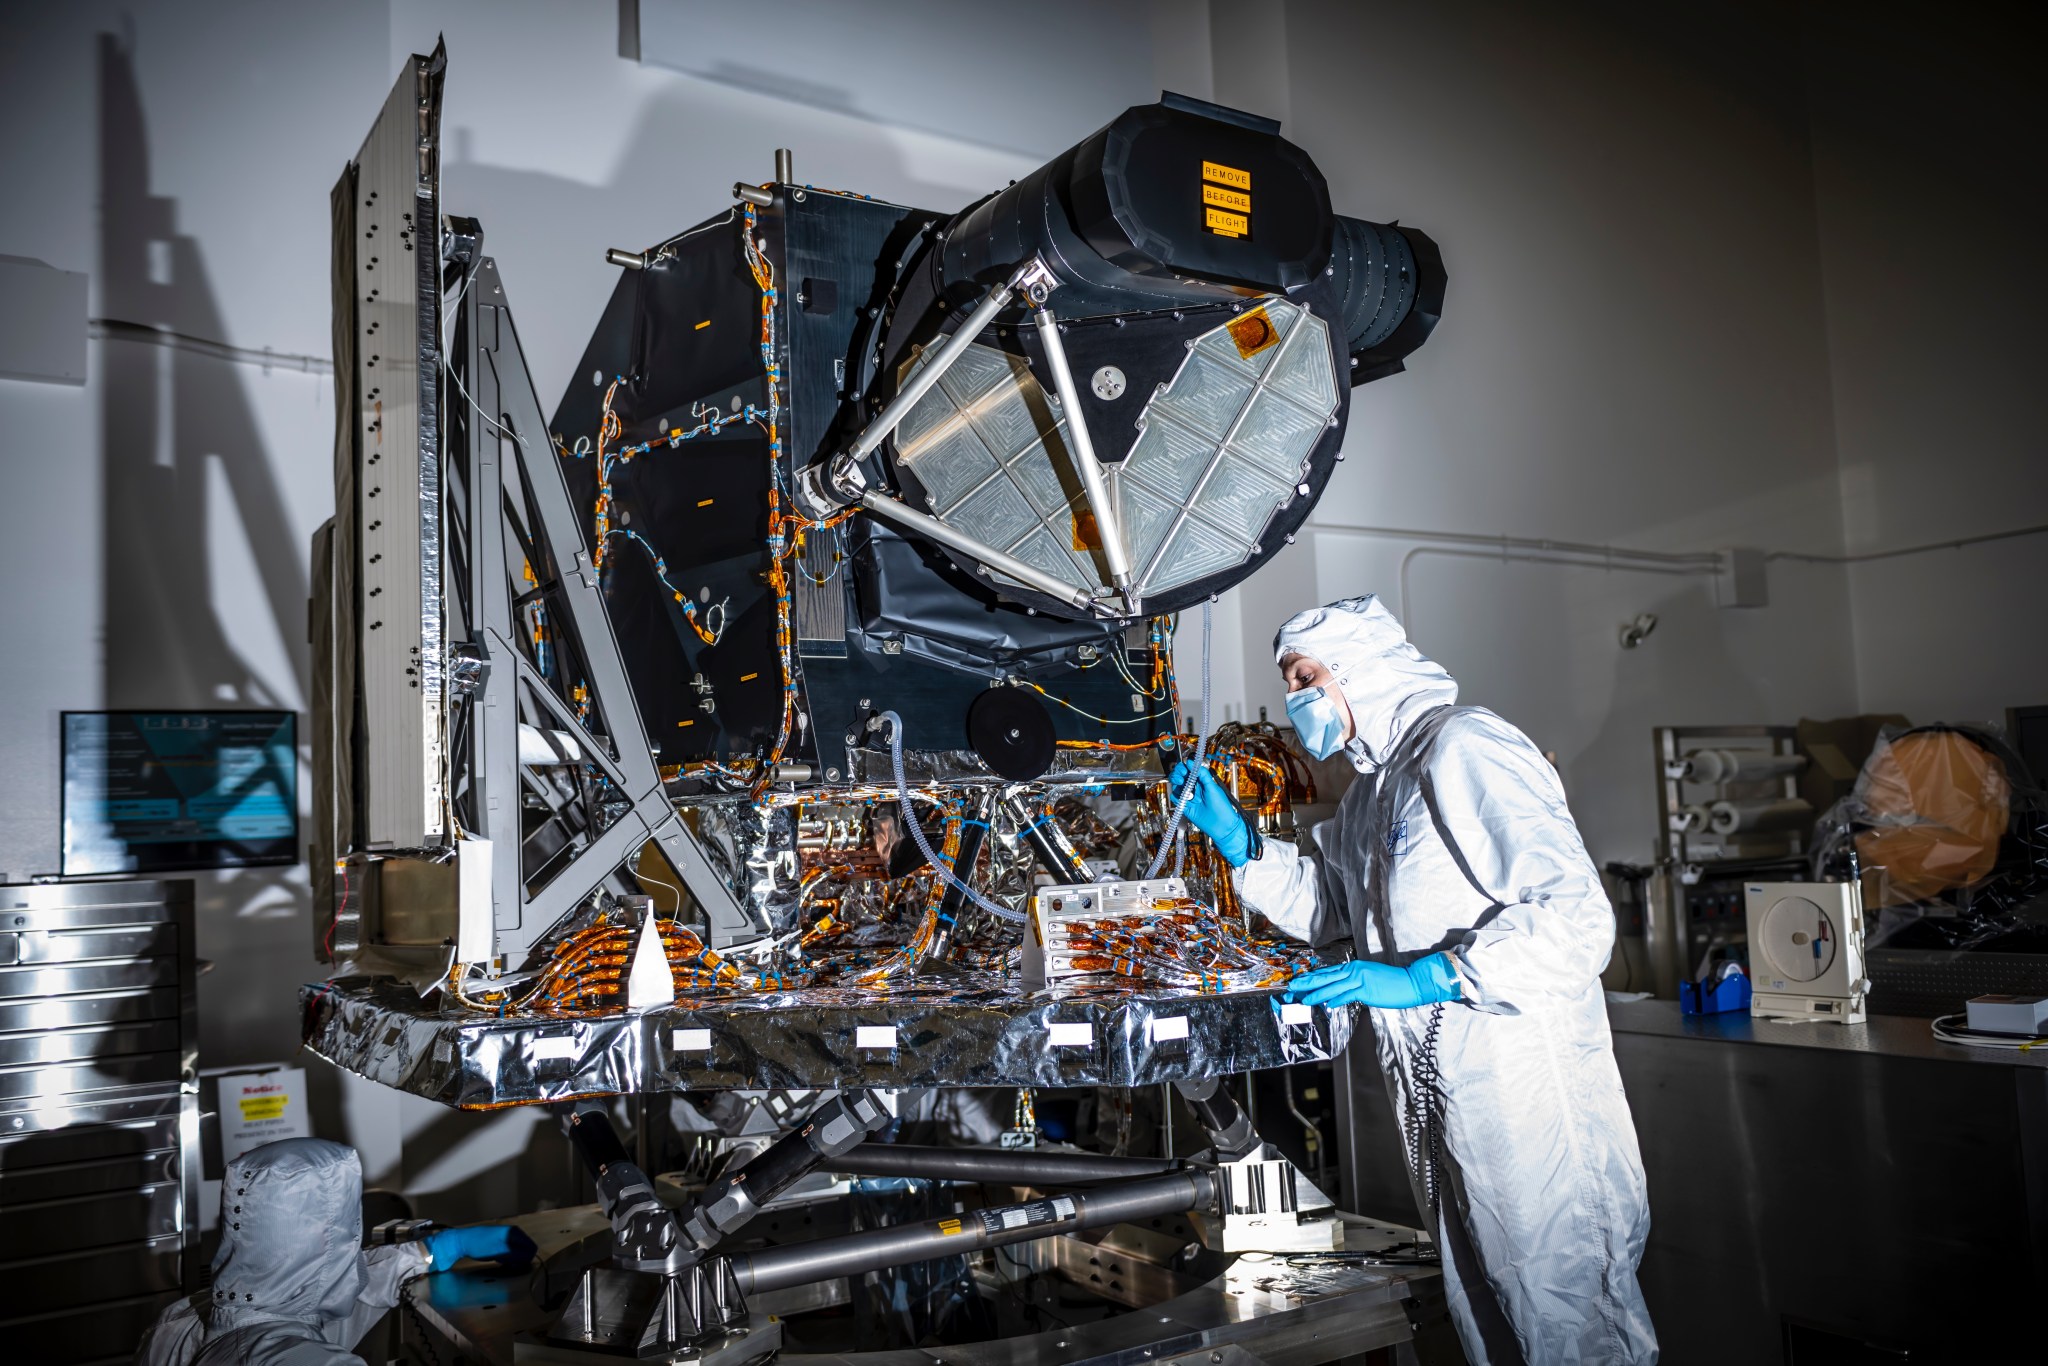 The Operational Land Imager 2 instrument in a clean room, being inspected by someone in a white clean room suit with blue gloves and a mask.